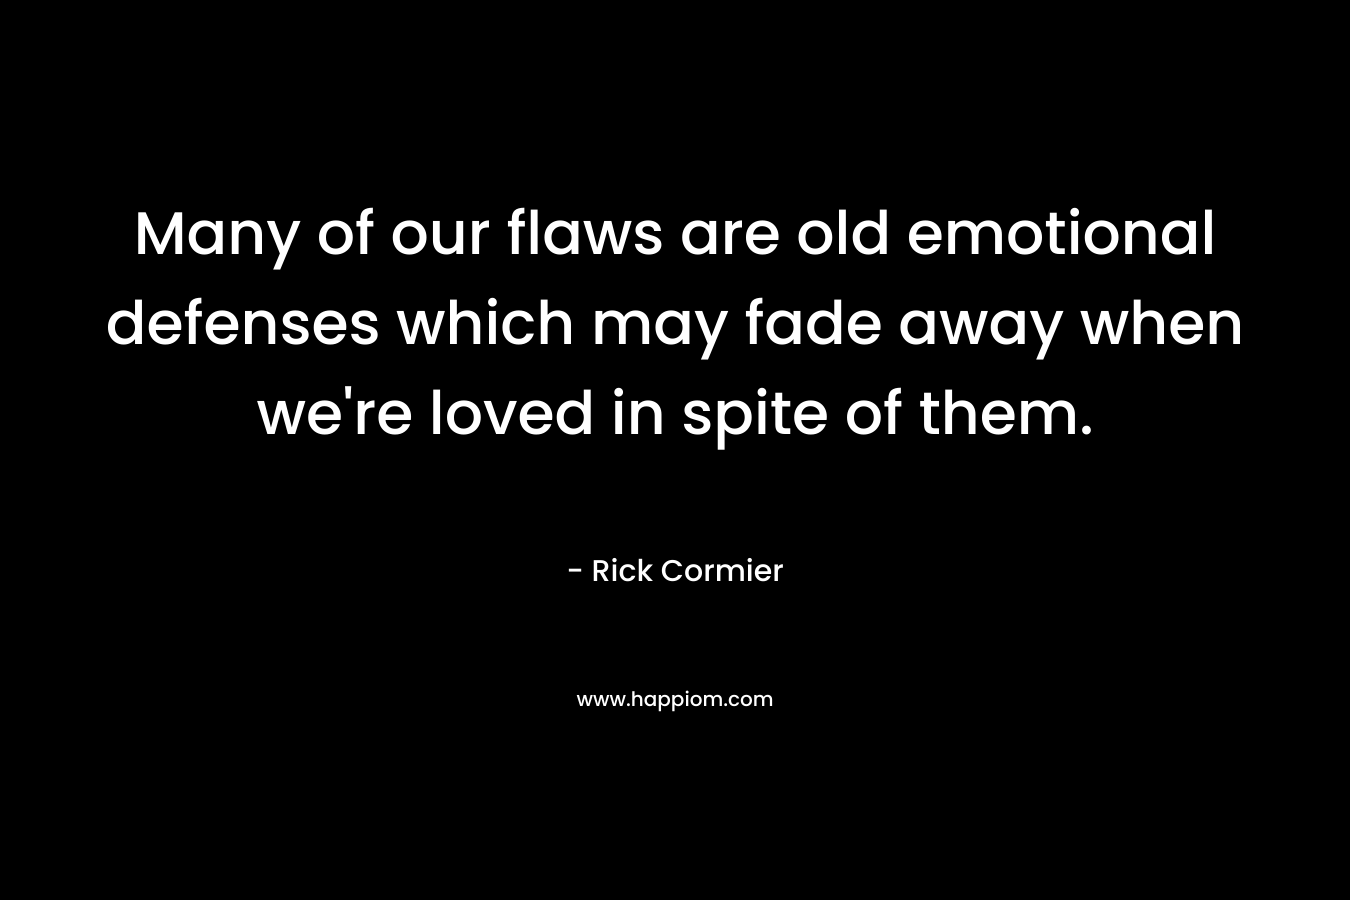 Many of our flaws are old emotional defenses which may fade away when we're loved in spite of them.